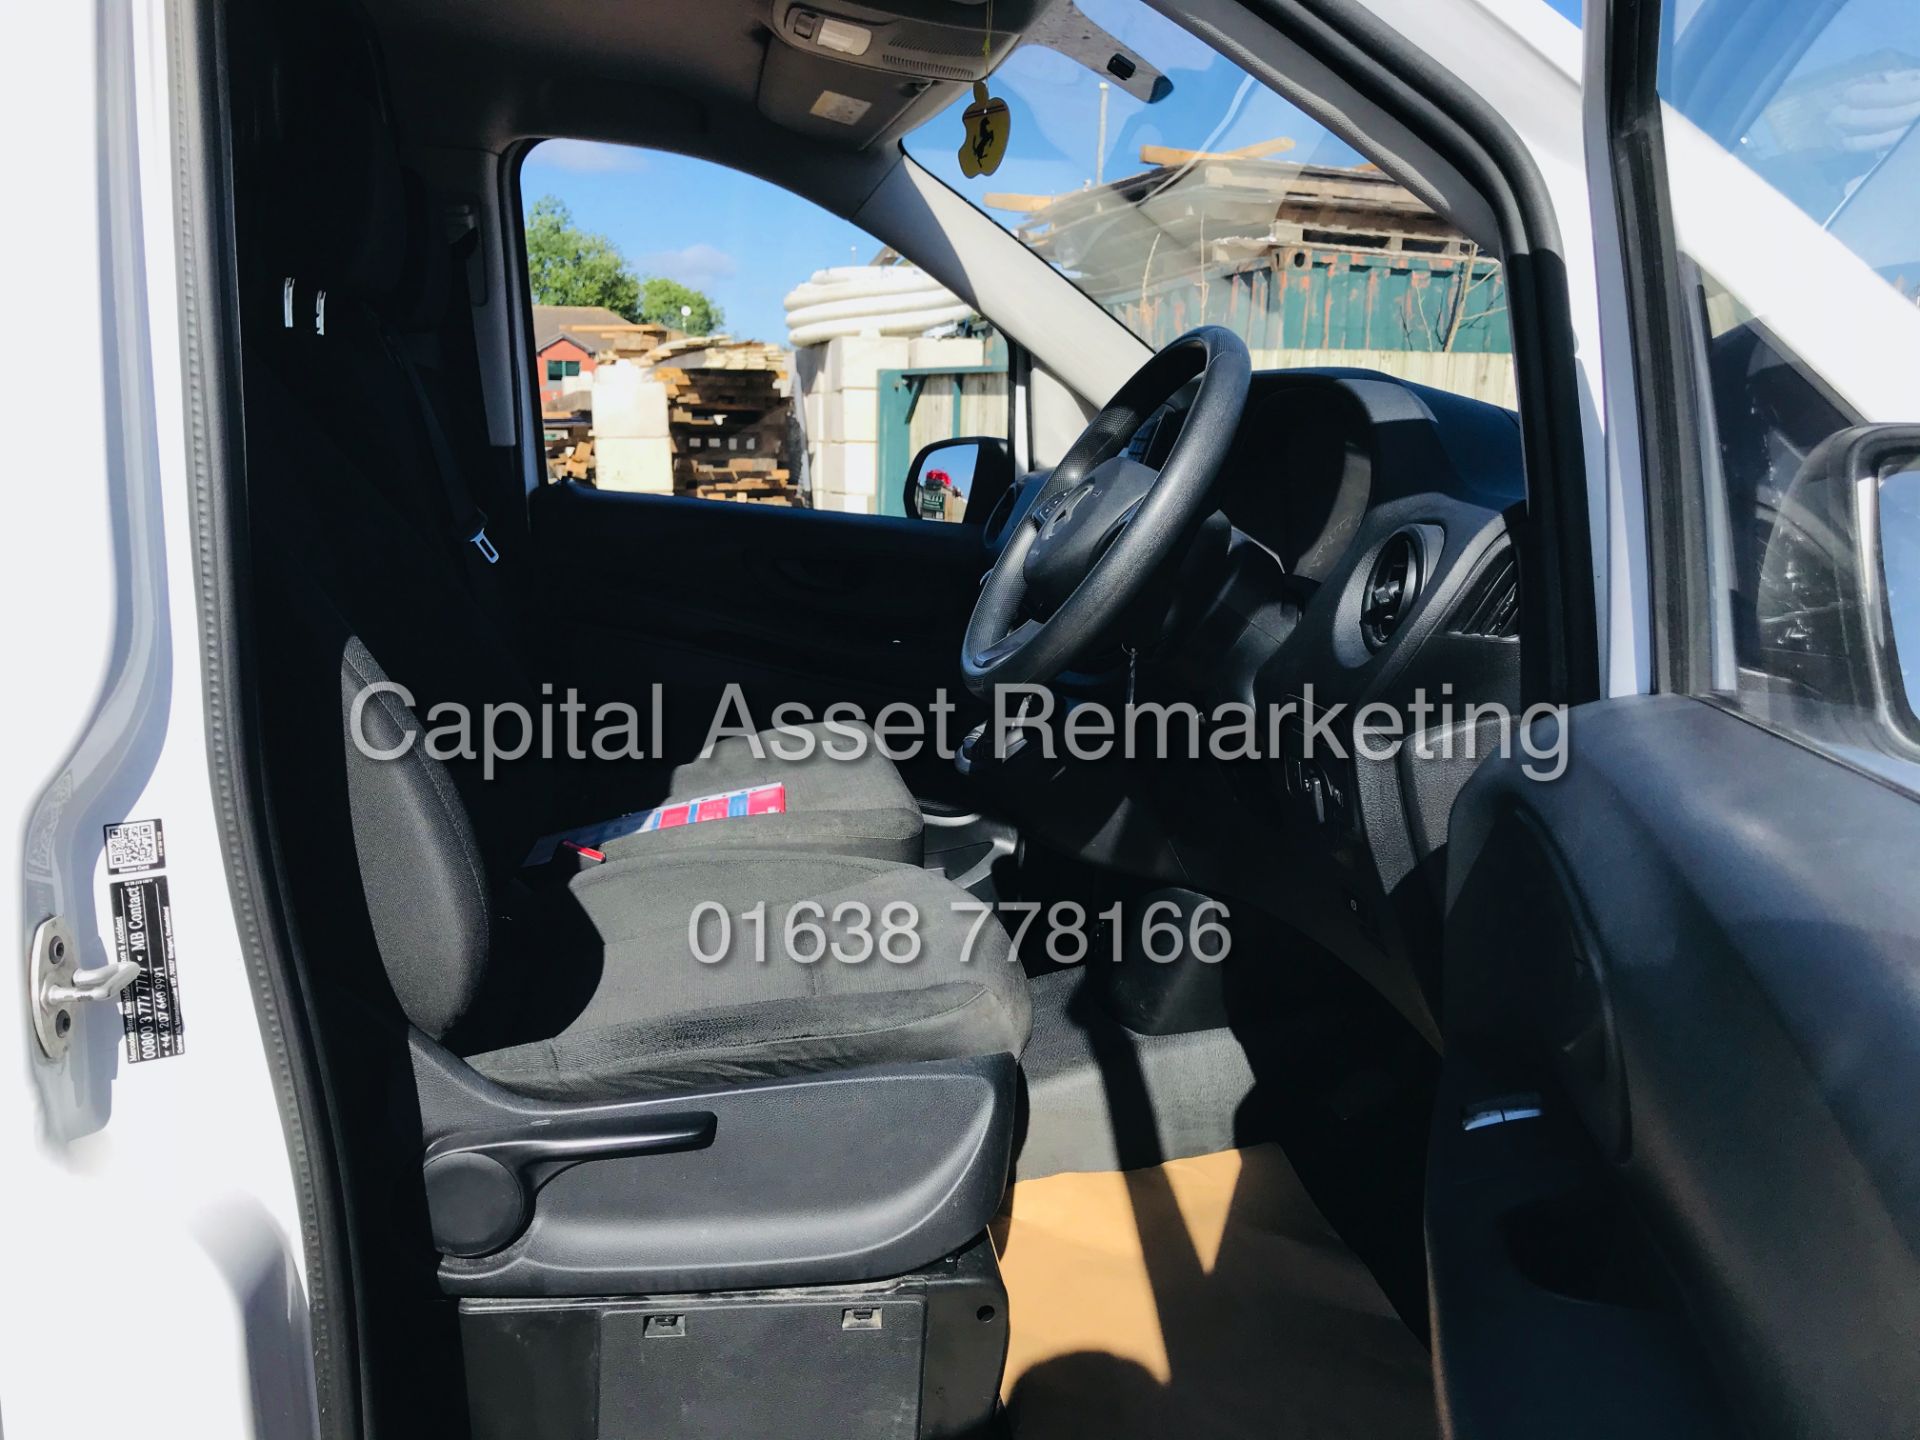 (On Sale) MERCEDES VITO 109CDI (17 REG) 1 OWNER - LOW MILEAGE WITH FSH *EURO 6 / ULEZ COMPLIANT* - Image 13 of 24